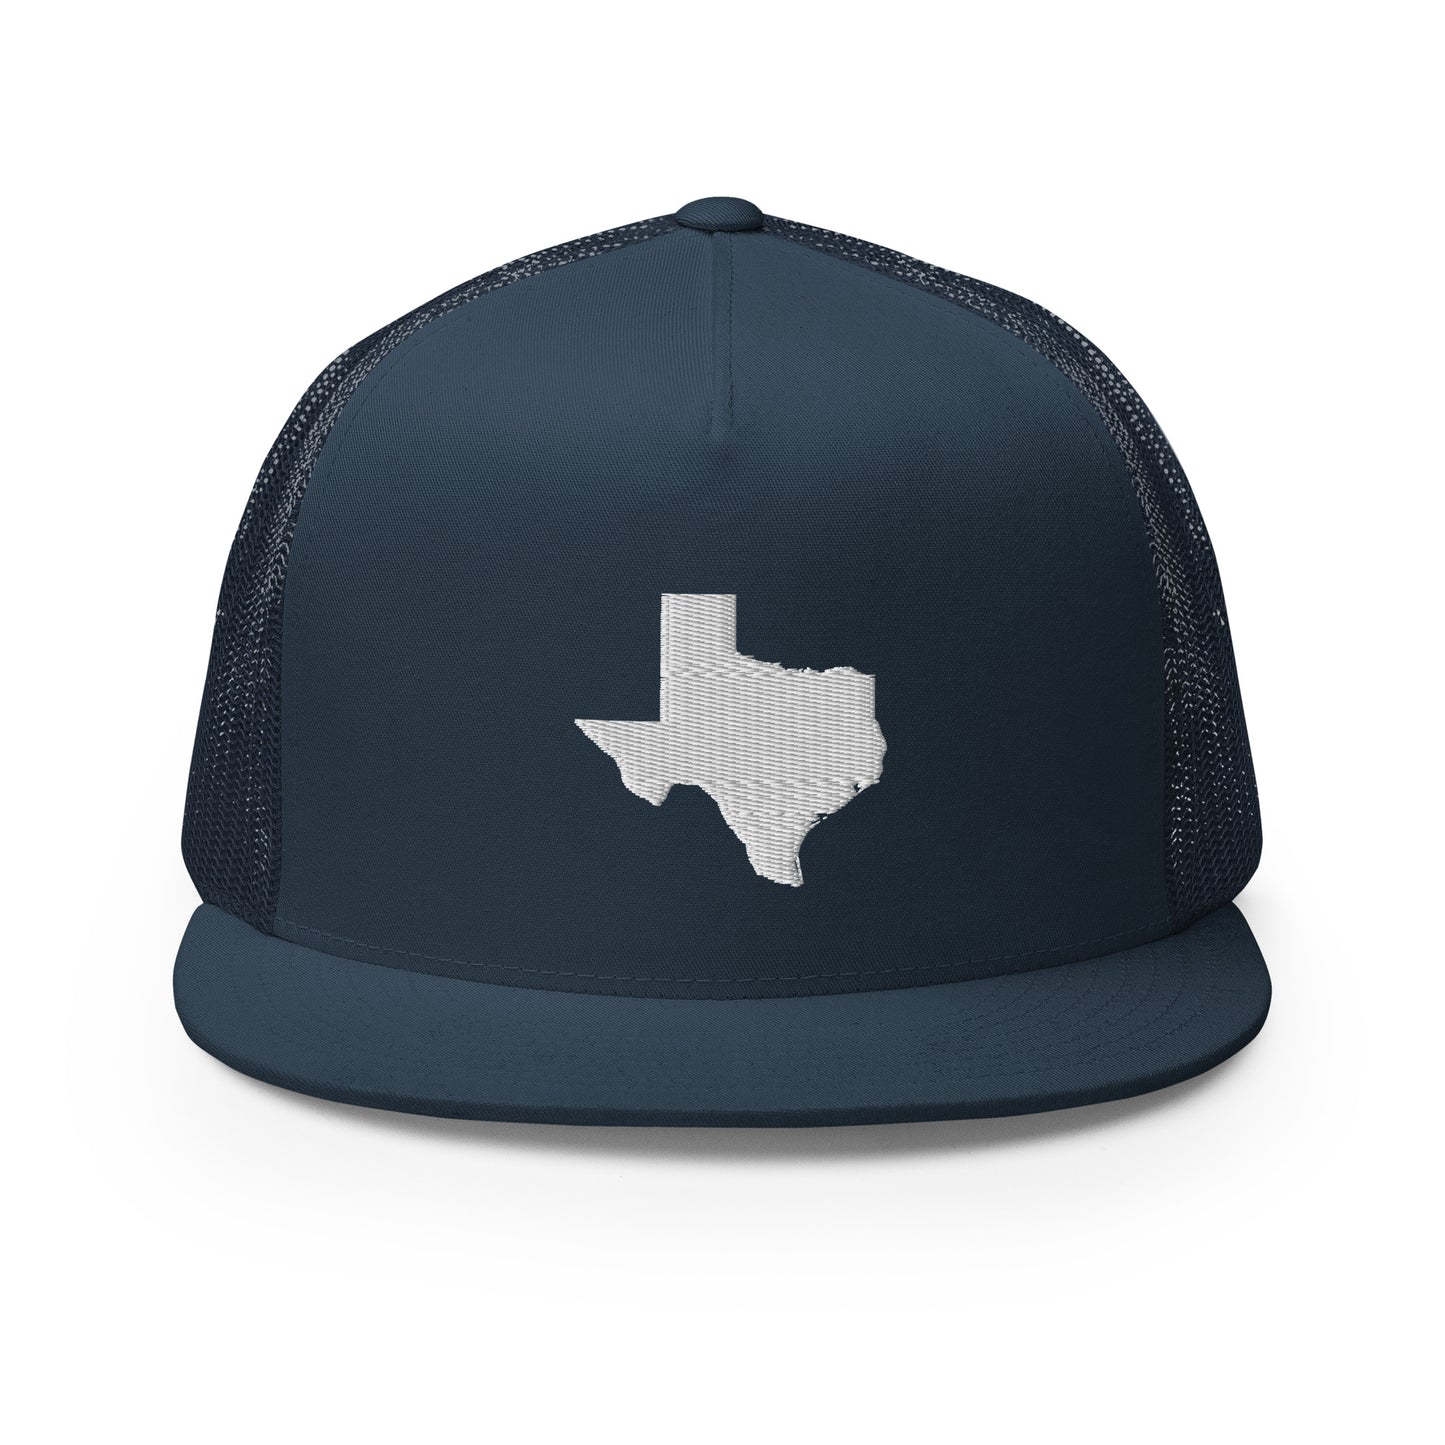 Texas State Silhouette High 5 Panel A-Frame Snapback Trucker Hat